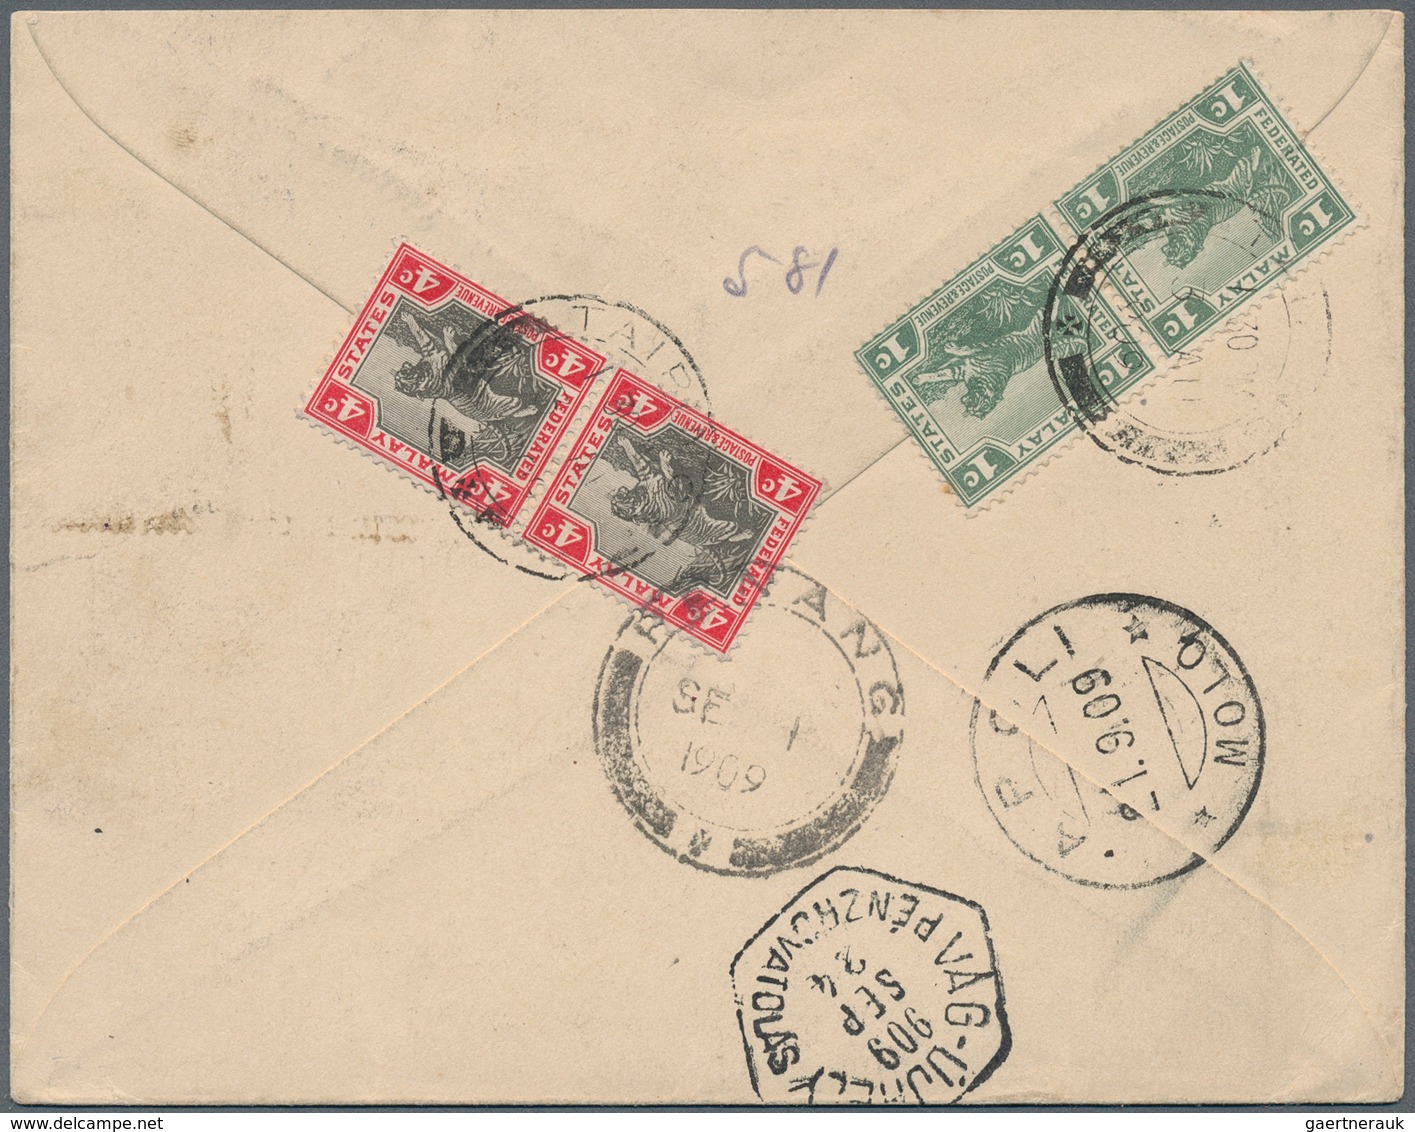 Malaiische Staaten - Perak: 1909 (31.8.), Registered Cover Bearing FMS Tiger Stamps On Both Sides In - Perak